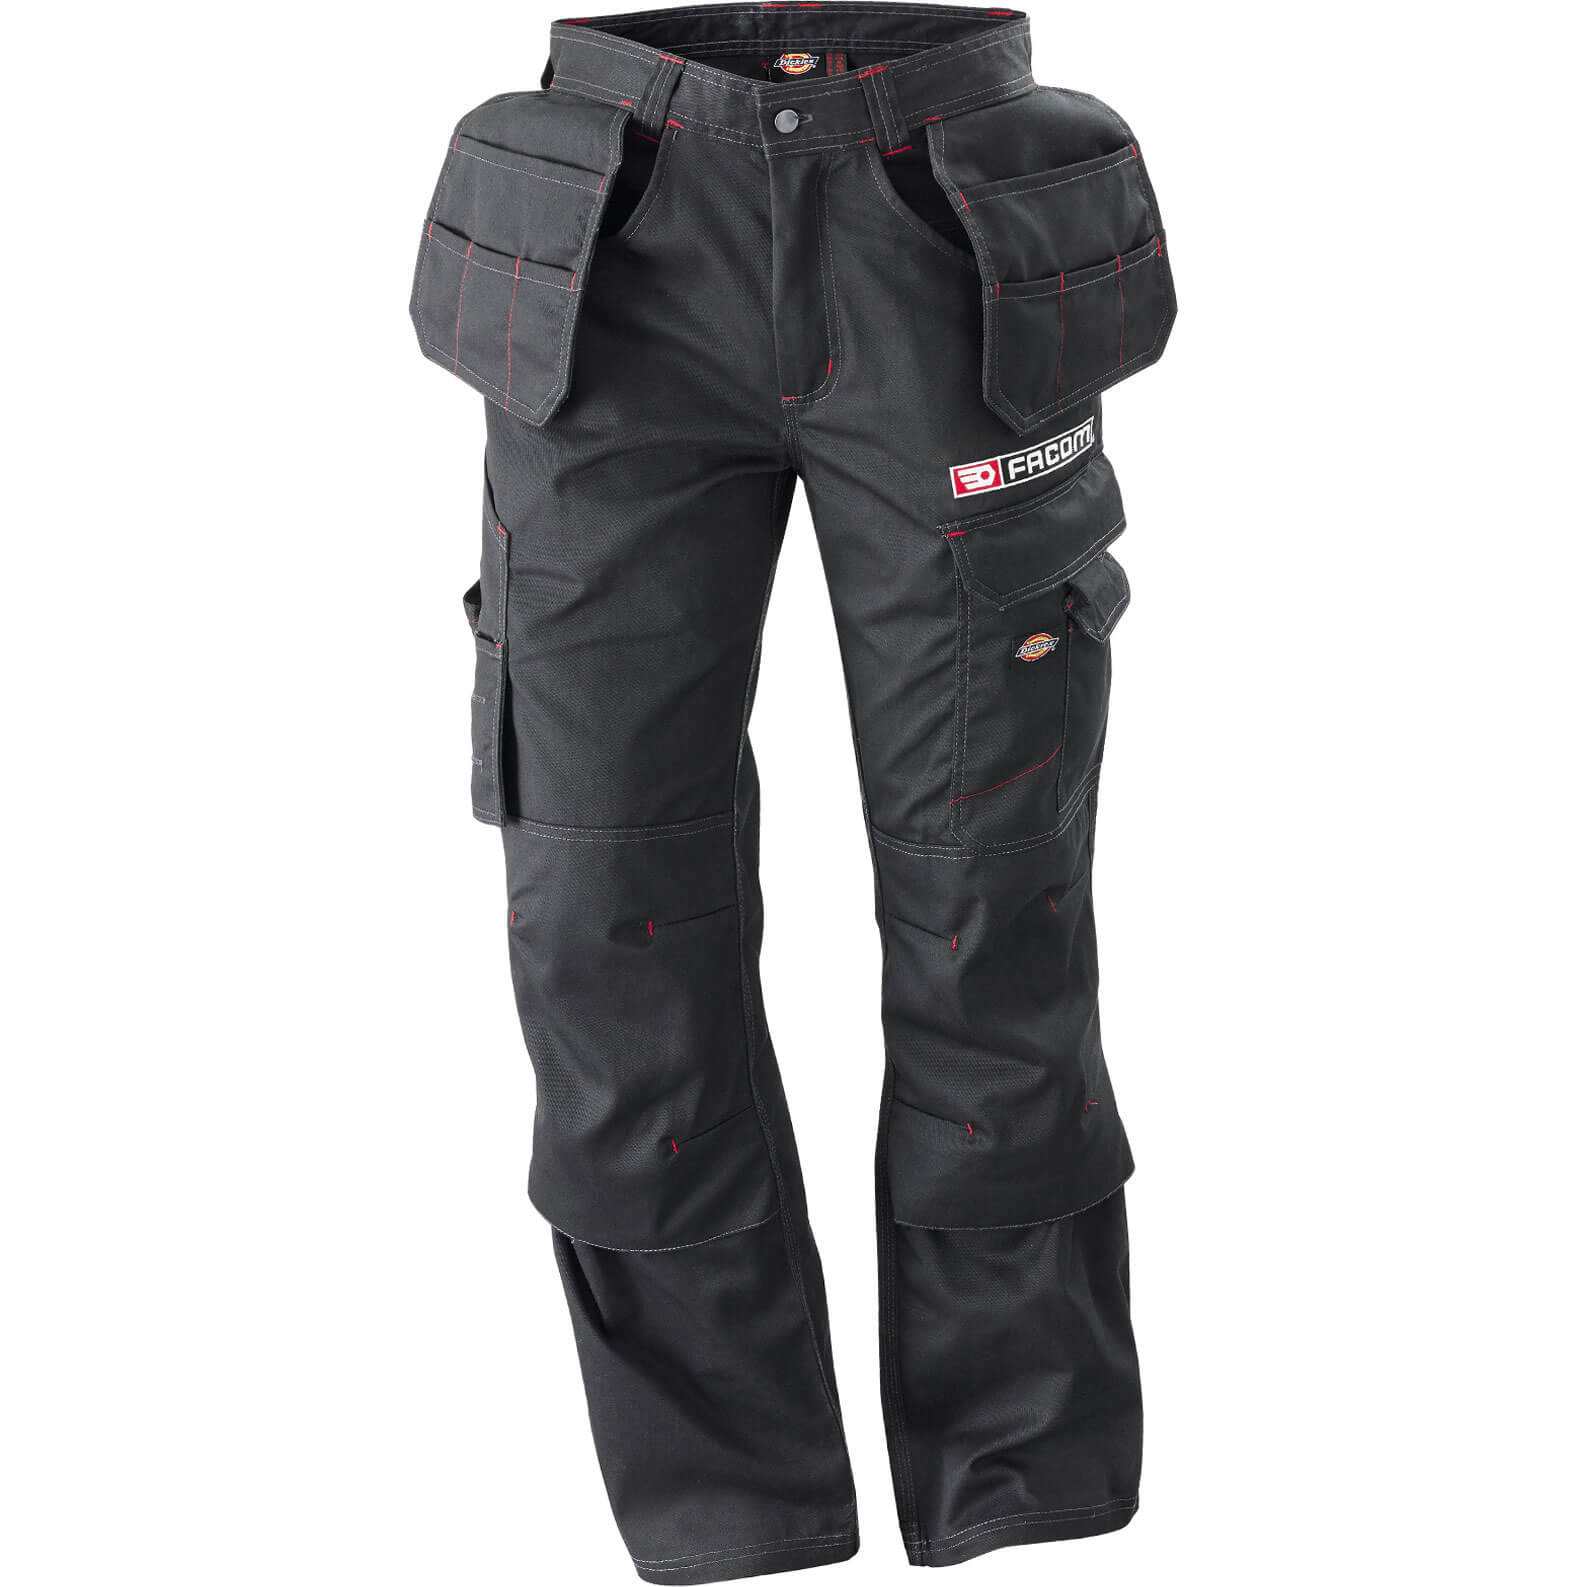 Photo of Facom Mens Work Trousers With Tool Holder And Knee Pad Pockets Black 3xl